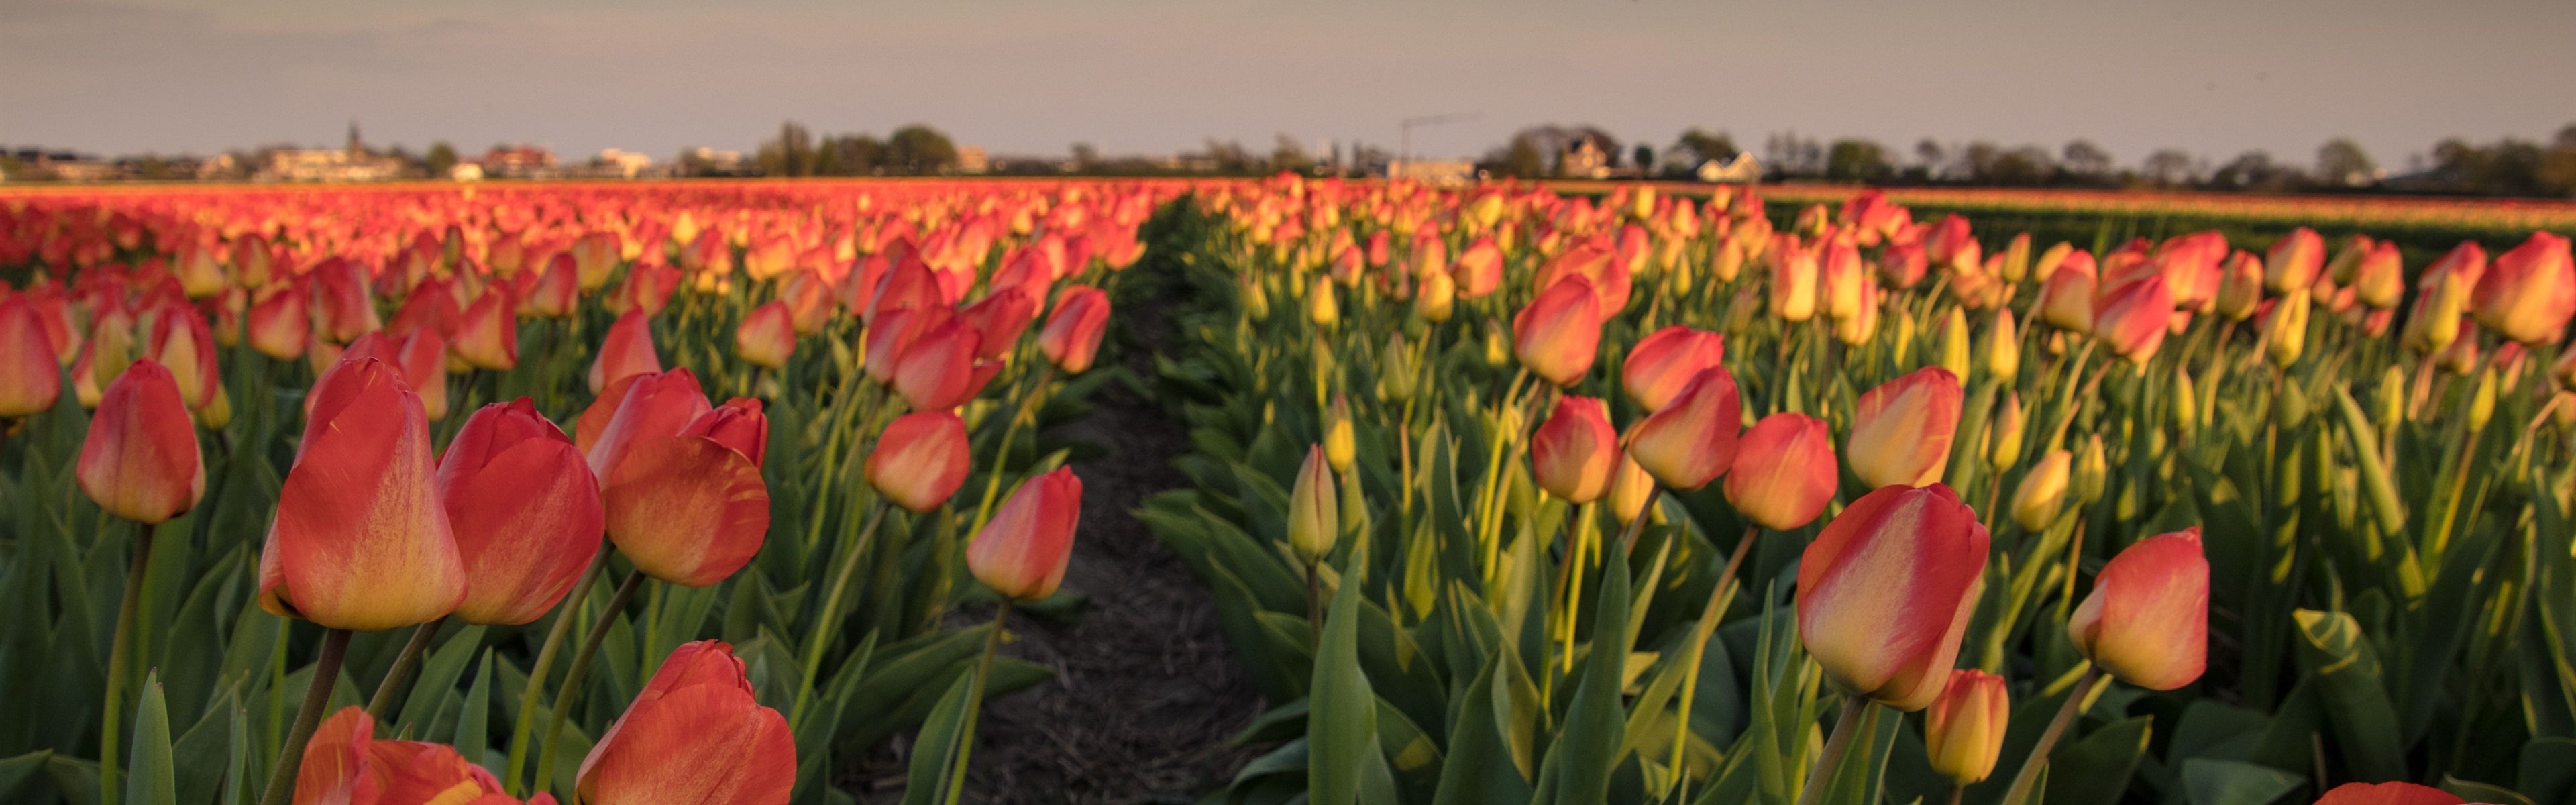 Netherlands, pink tulips, flowers field, morning 1242x2688 iPhone